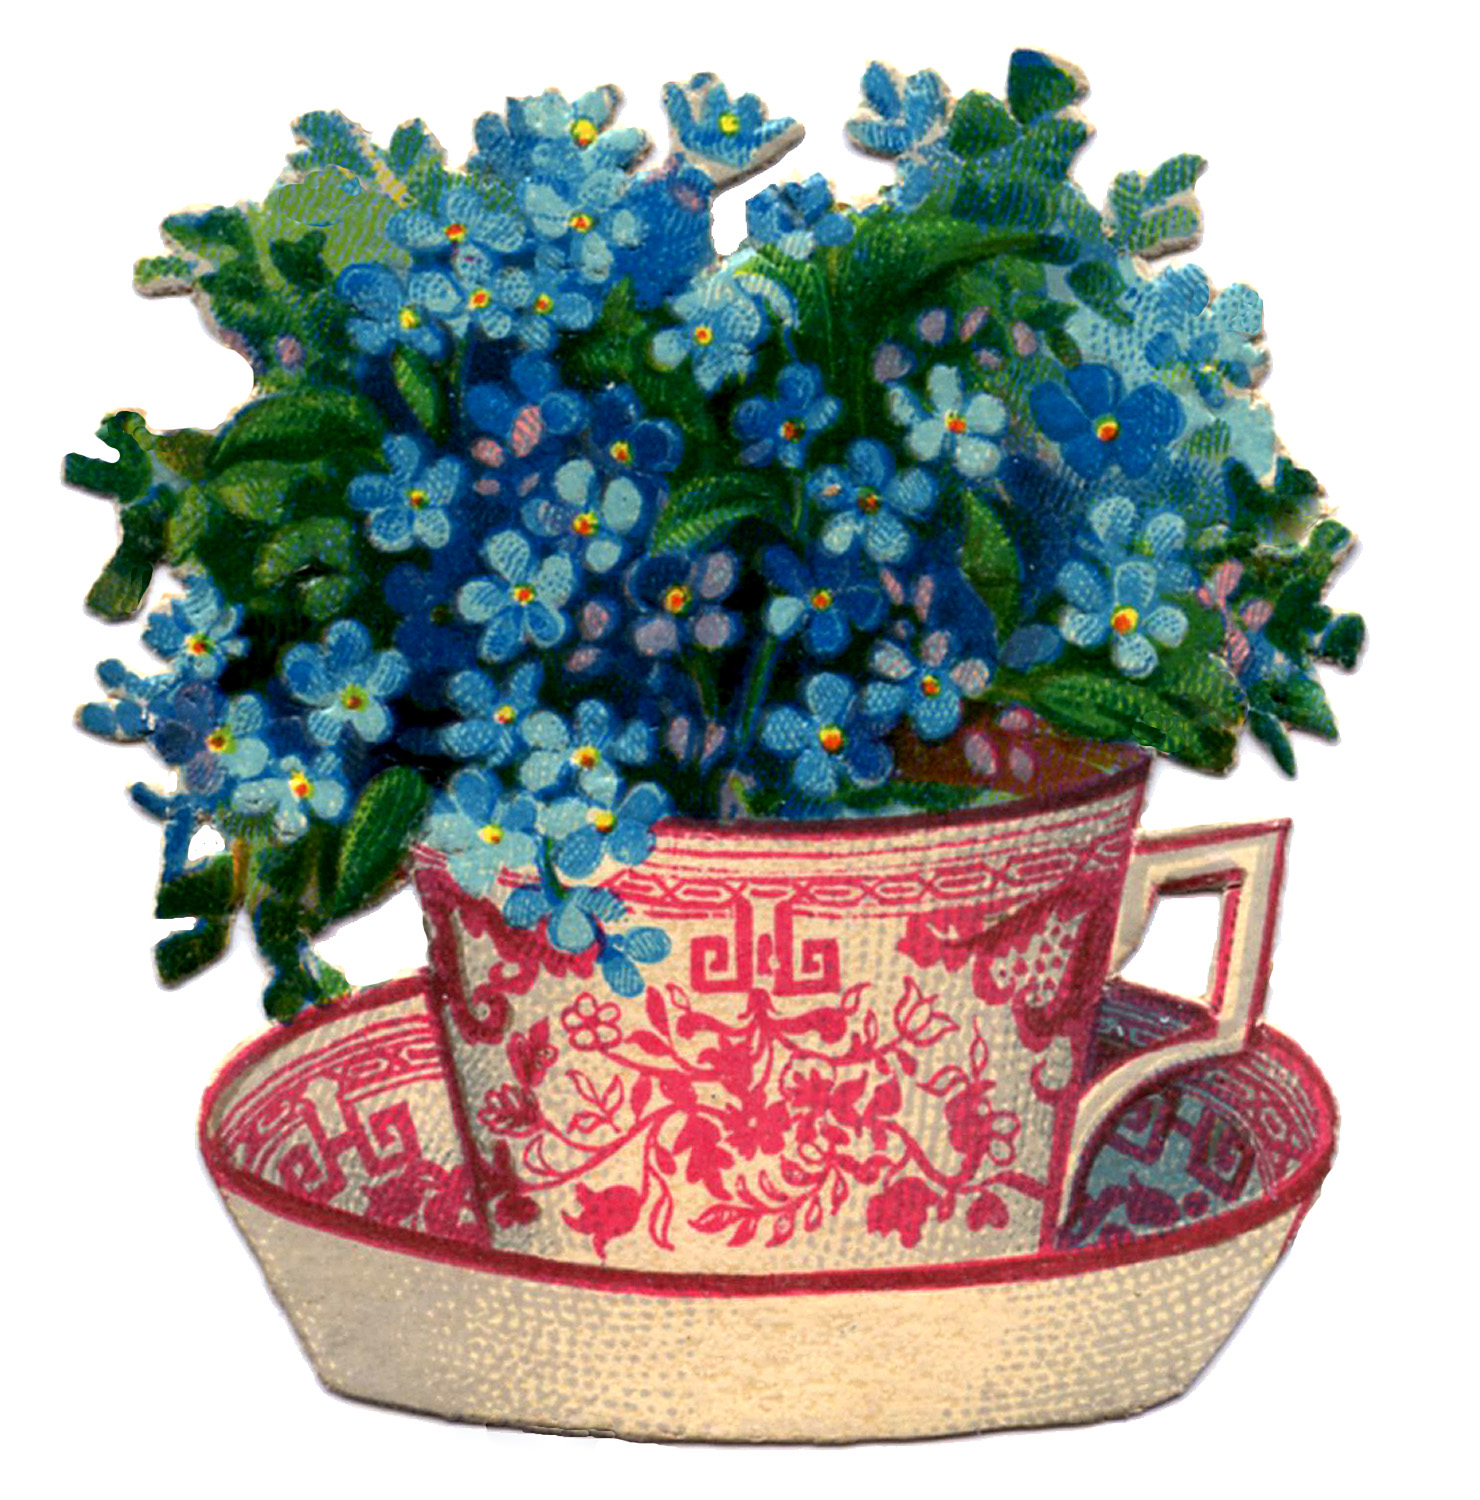 Mother's Day Image - Beautiful Teacup with Flowers - The Graphics ...